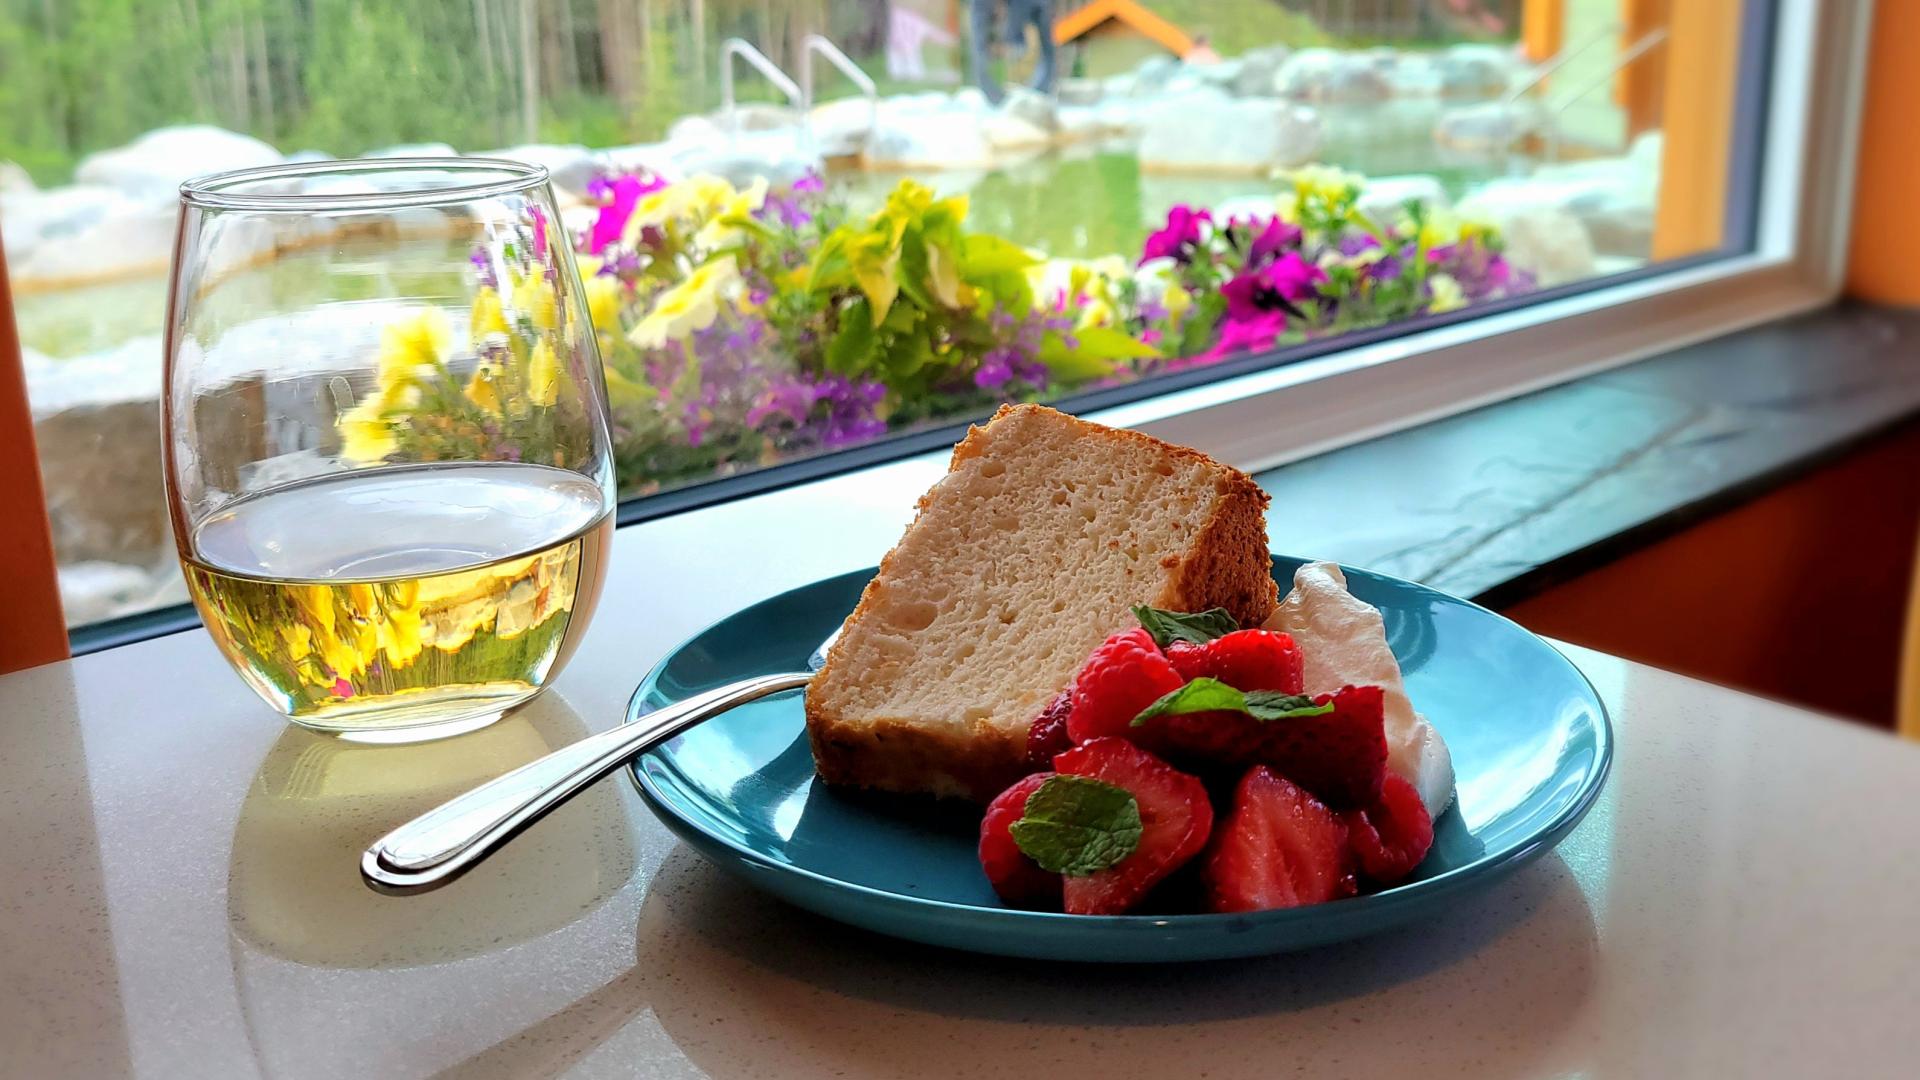 Angel food cake with strawberries and a glass of wine